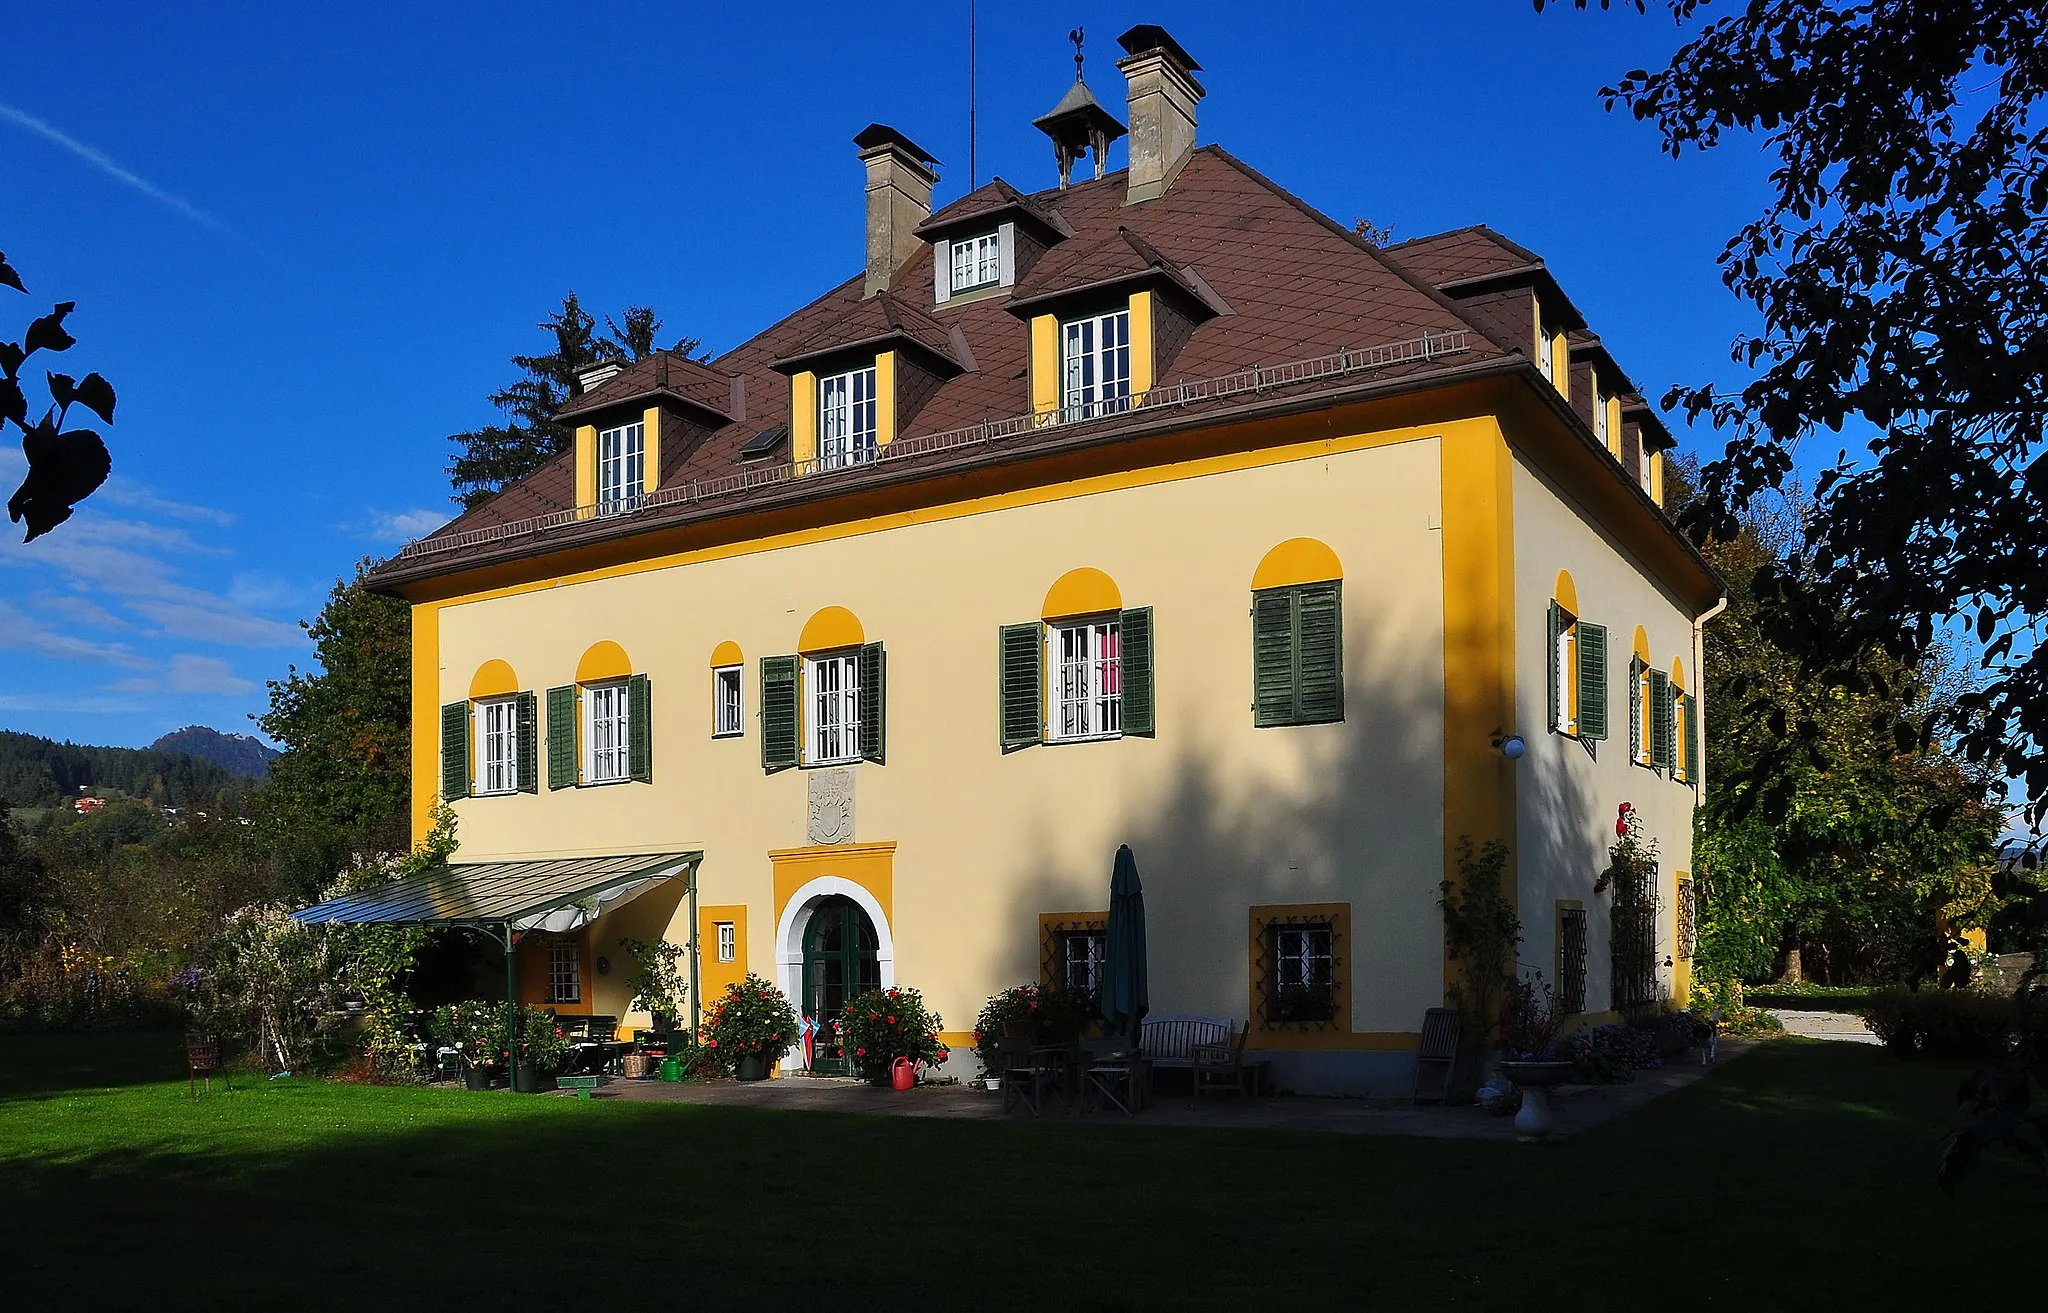 Photo showing: Manor-house of the “Schoenfeldhof”, situated in the Feldkirchner Street in the the locality Lendorf, 14th district “Woelfnitz” of the Carinthian capital Klagenfurt on the Lake Woerth, Carinthia, Austria